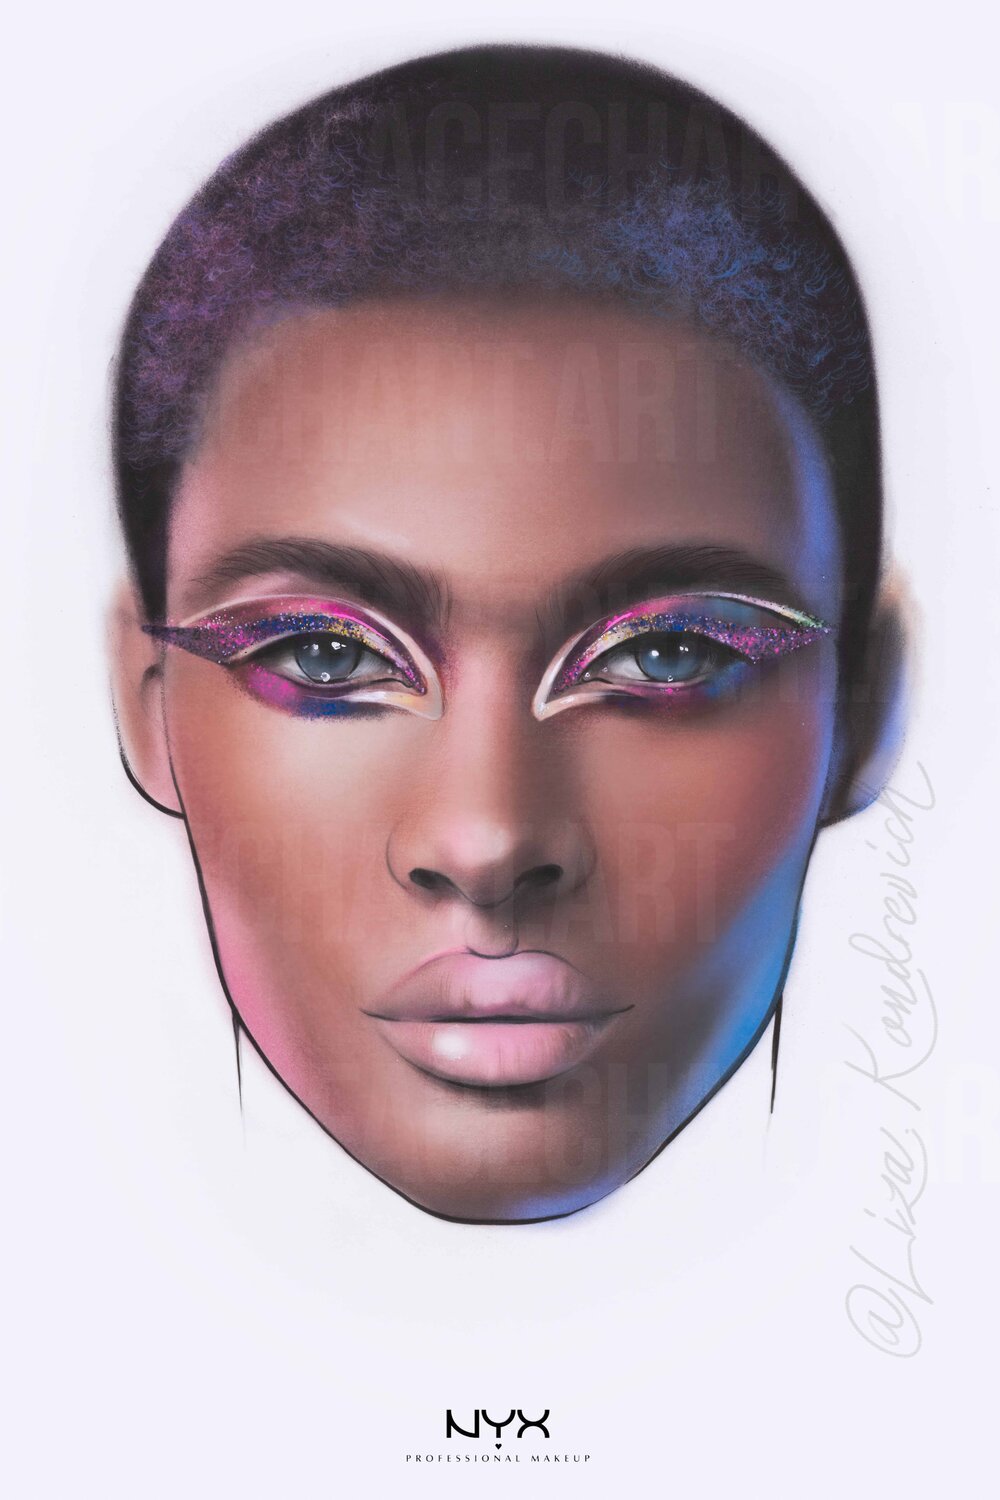 Dark skin ton face chart with male facial features and graphic or glue-on eye liner. By Liza Kondrevich